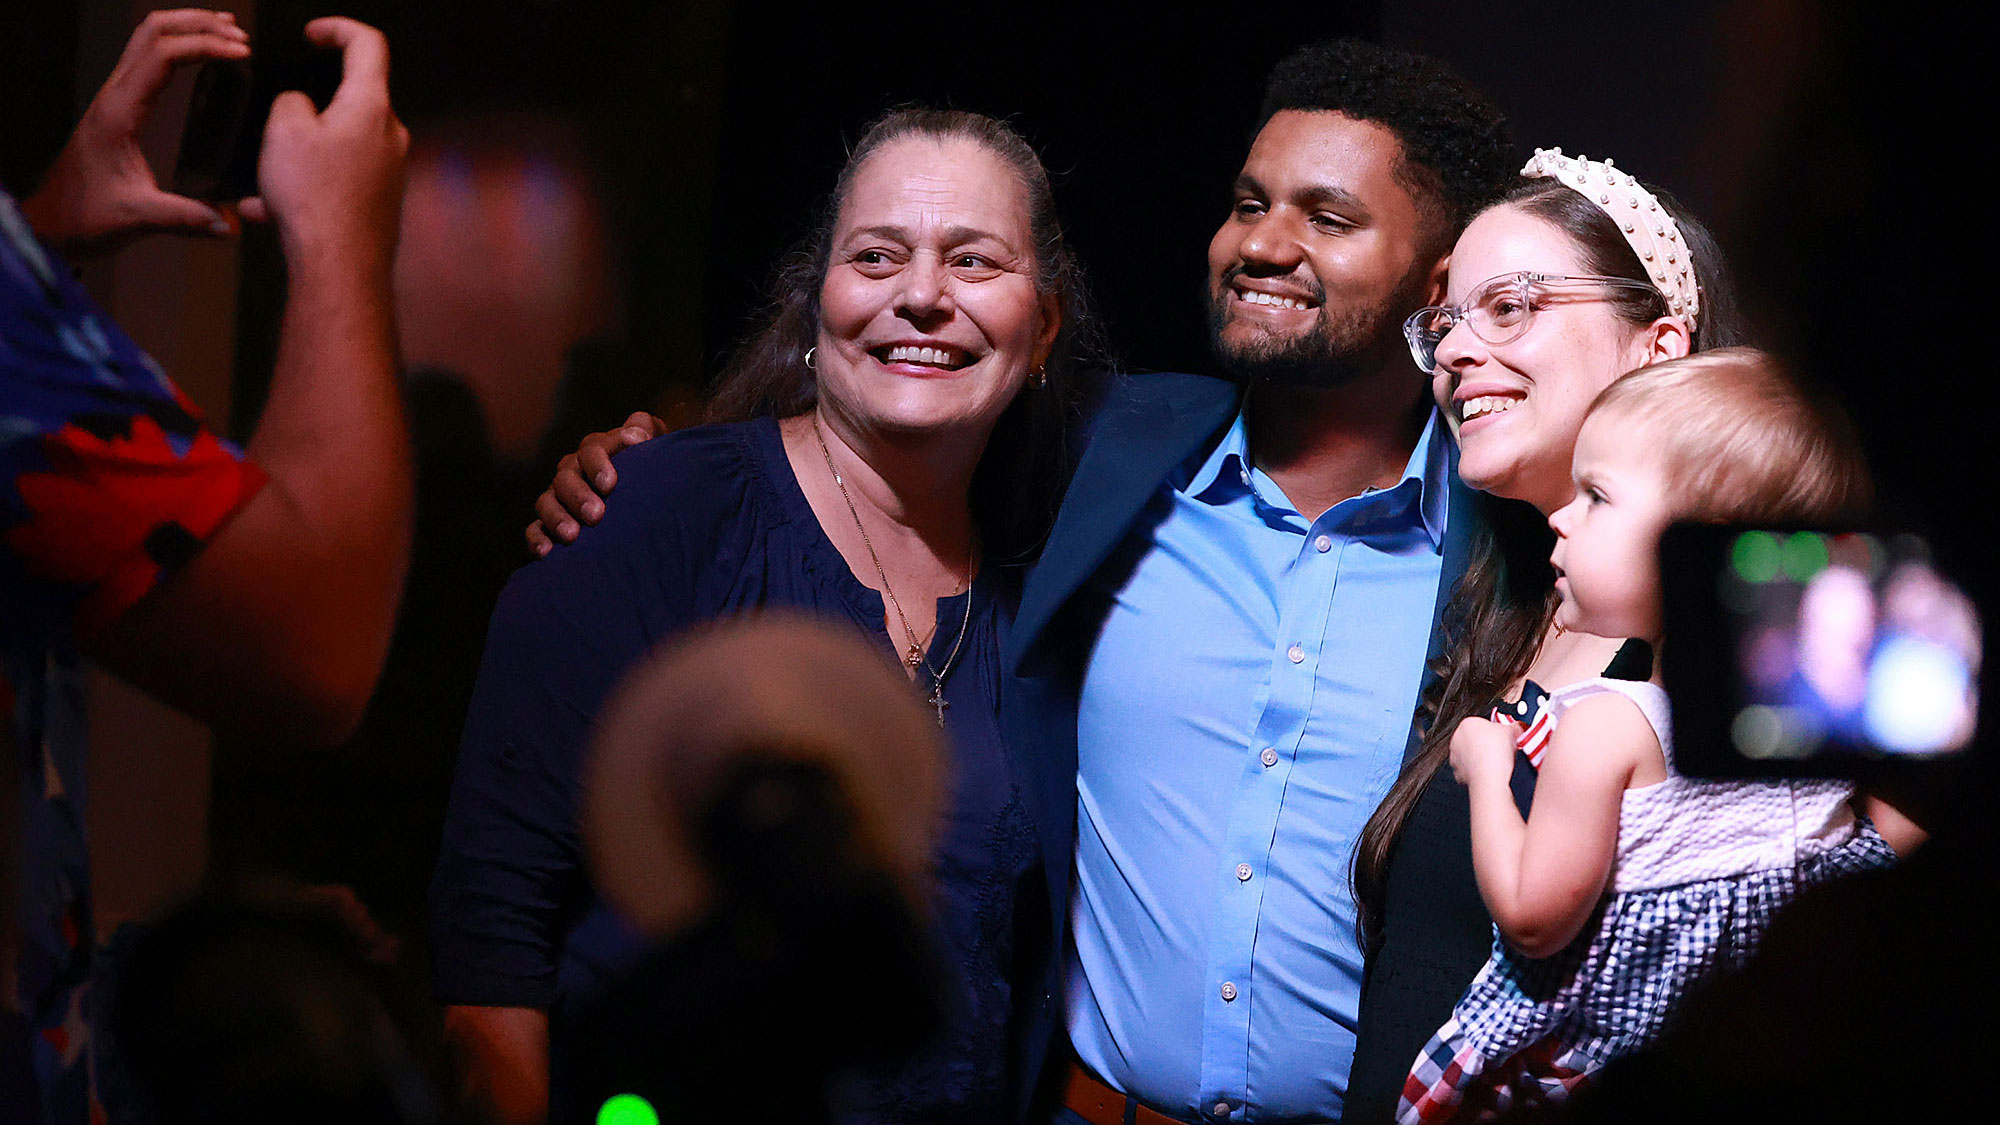 Maxwell Frost poses with supporters during a victory party in Orlando. Frost, a 25-year-old Democrat, is projected to win the open House seat in Florida's 10th Congressional District. That would make him the first member of Generation Z elected to Congress. Members of Gen Z — those born after 1996 — are now old enough to be elected to the House.